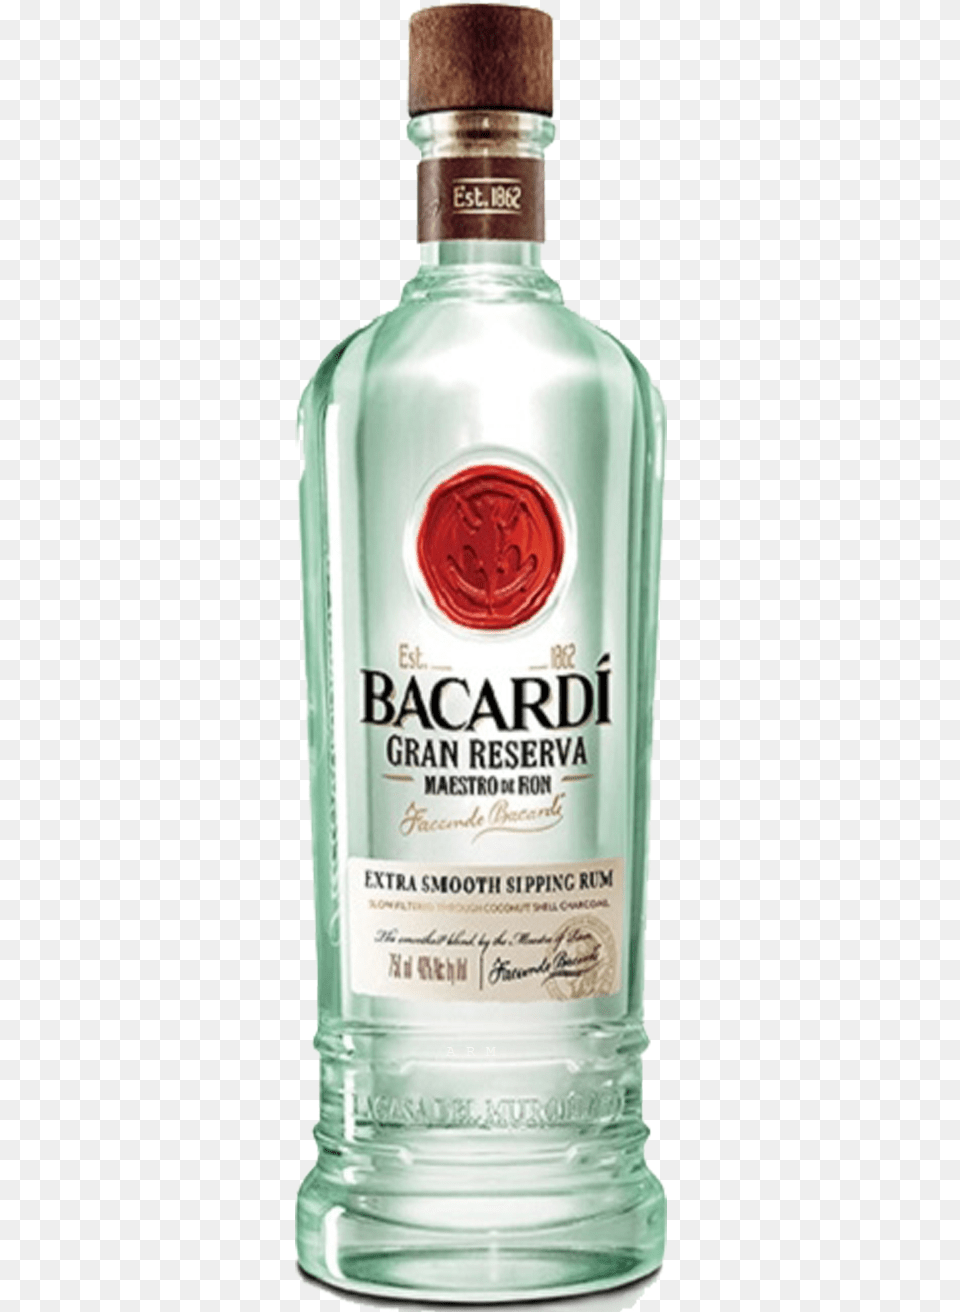 Maestro Rum Bacardi Gran Reserva Extra Smooth Sipping Rum, Alcohol, Beverage, Gin, Liquor Png Image